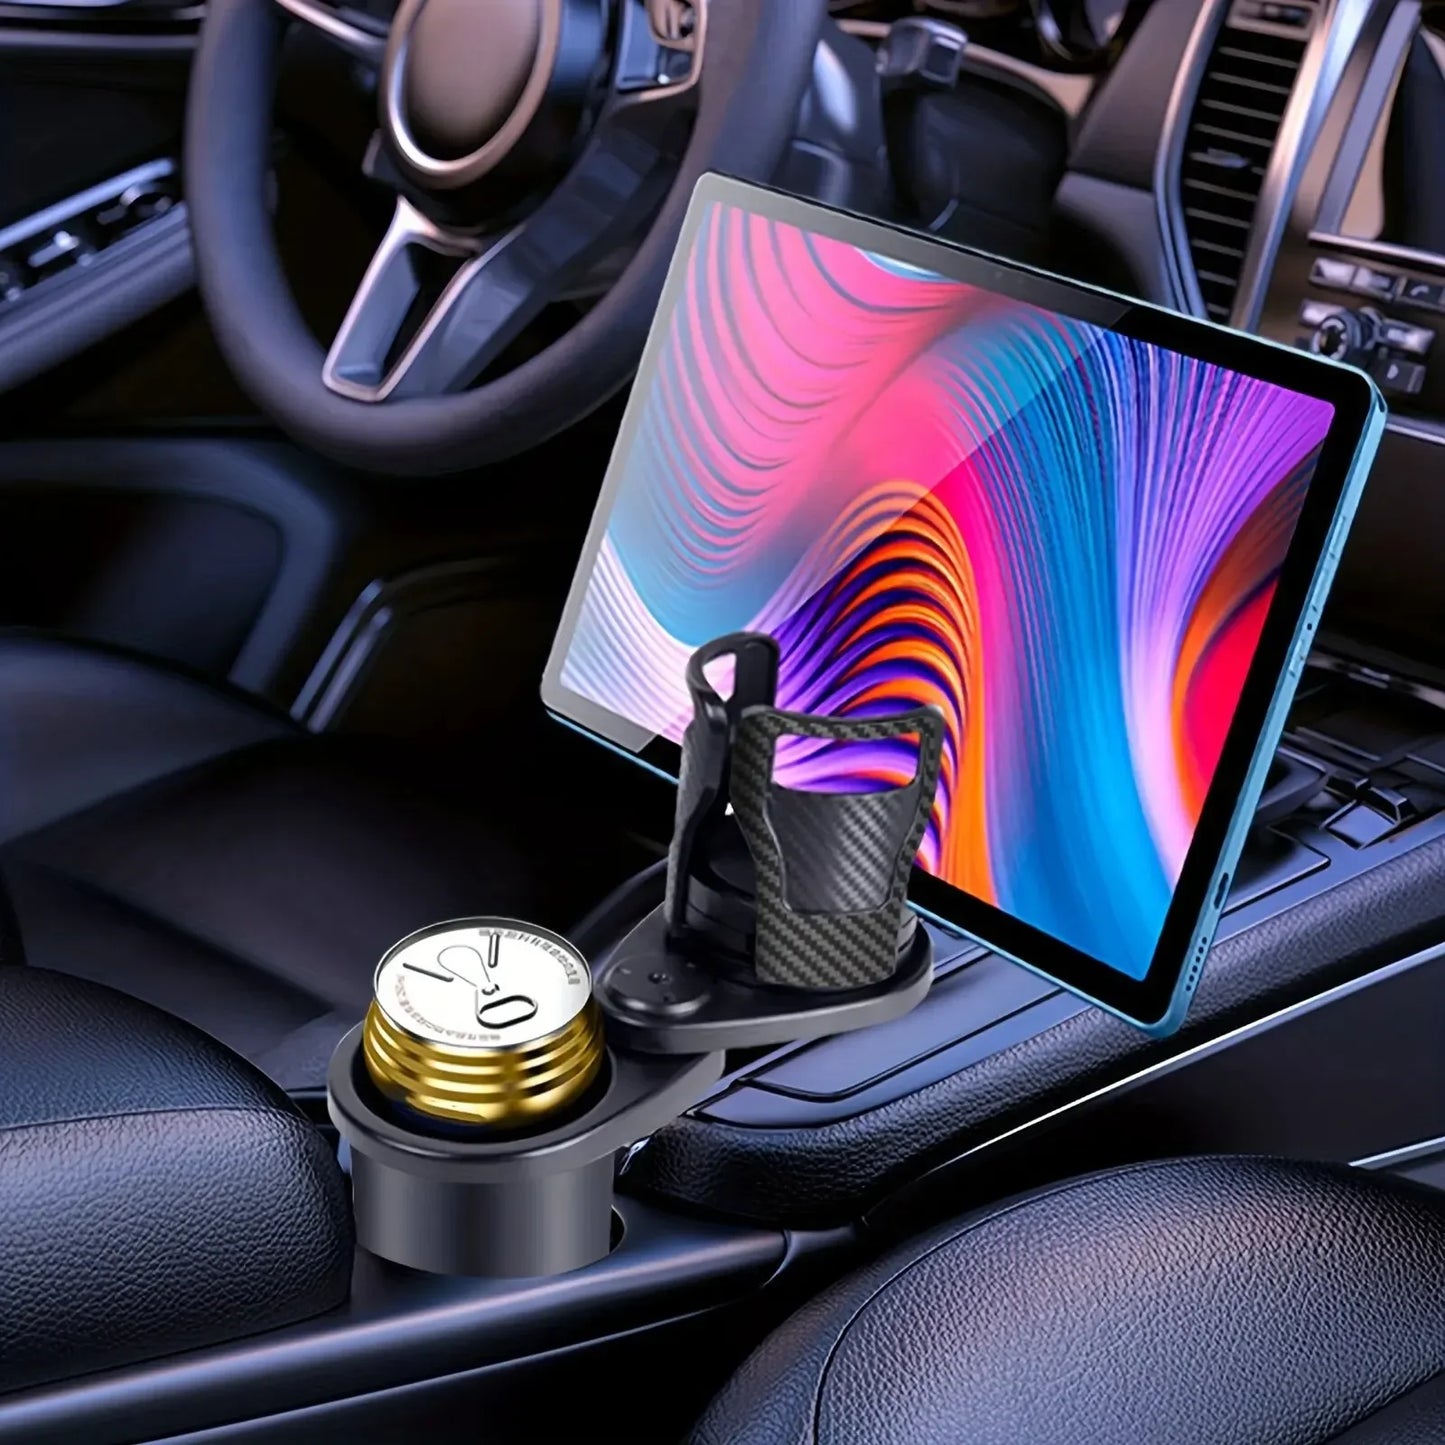 2-in-1 Vehicle Cup Holder & Phone Mount